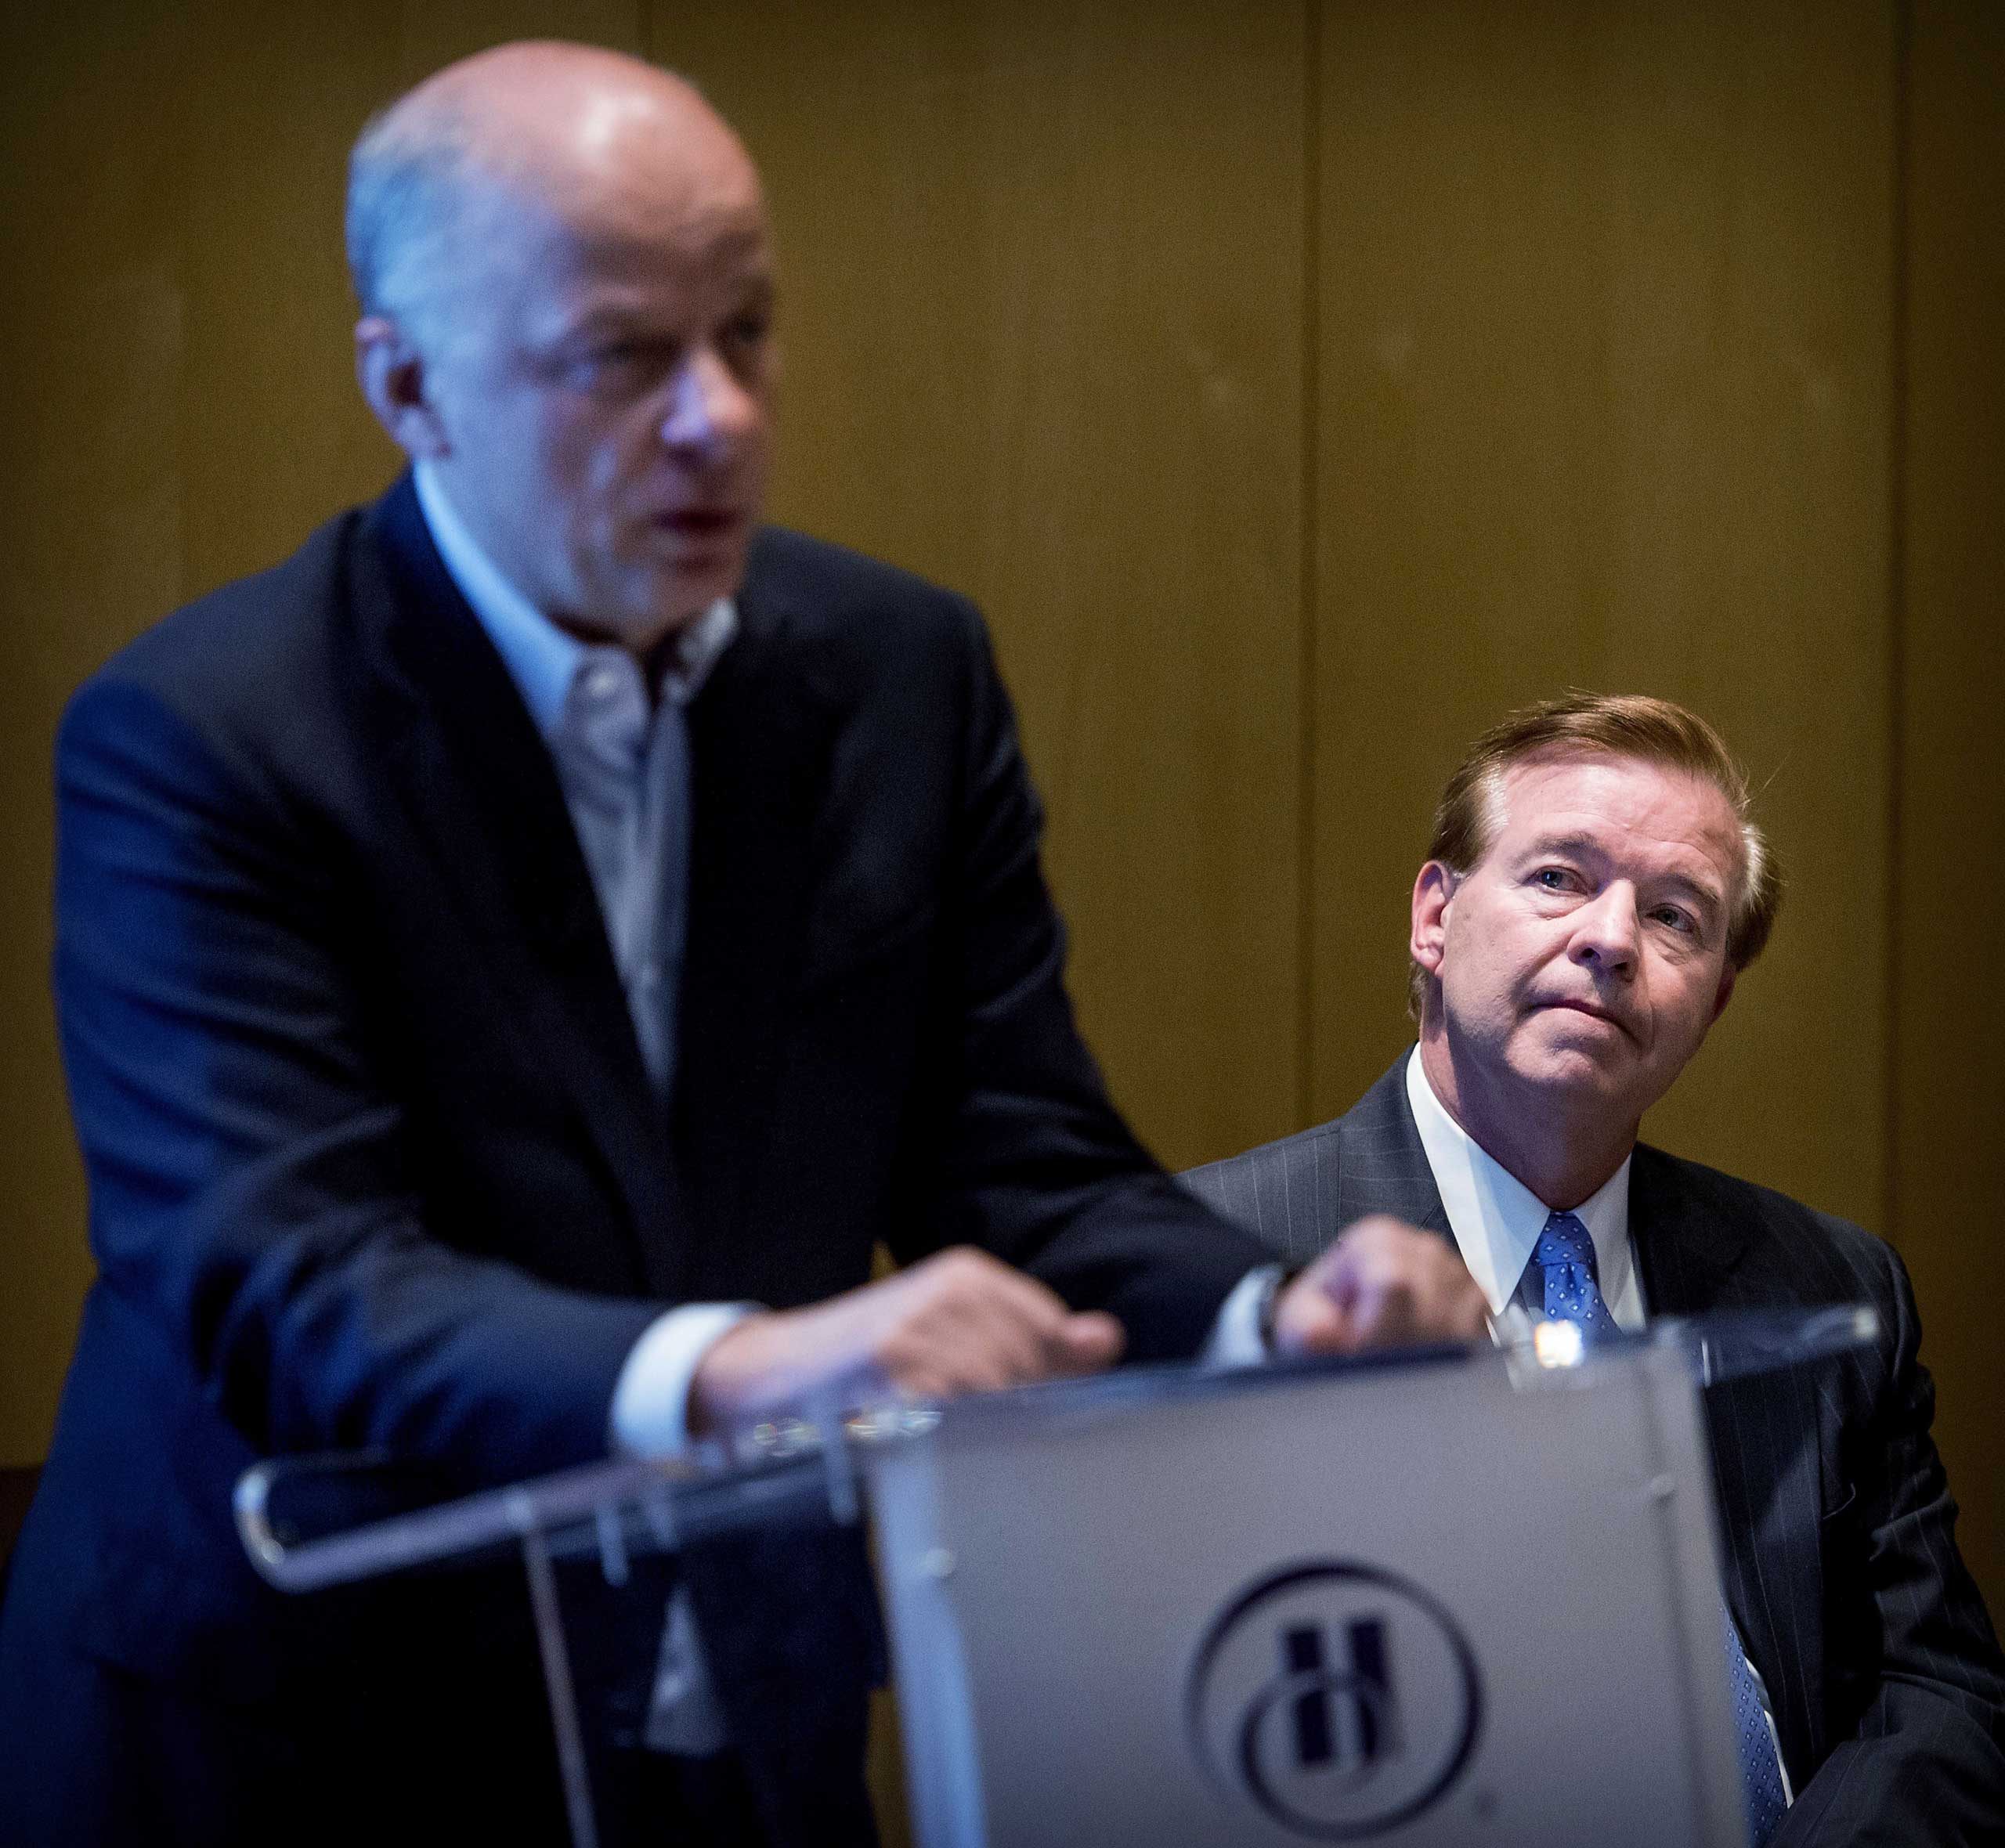 David J. Bronczek (R), president and chief executive officer of FedEx Express, and Tex Gunning (L), CEO of the Dutch TNT Express attend a press conference in Amsterdam on April 7, 2015, regarding the acquisition of TNT by the US FedEx. (Koen Van Weel—AFP/Getty Images)